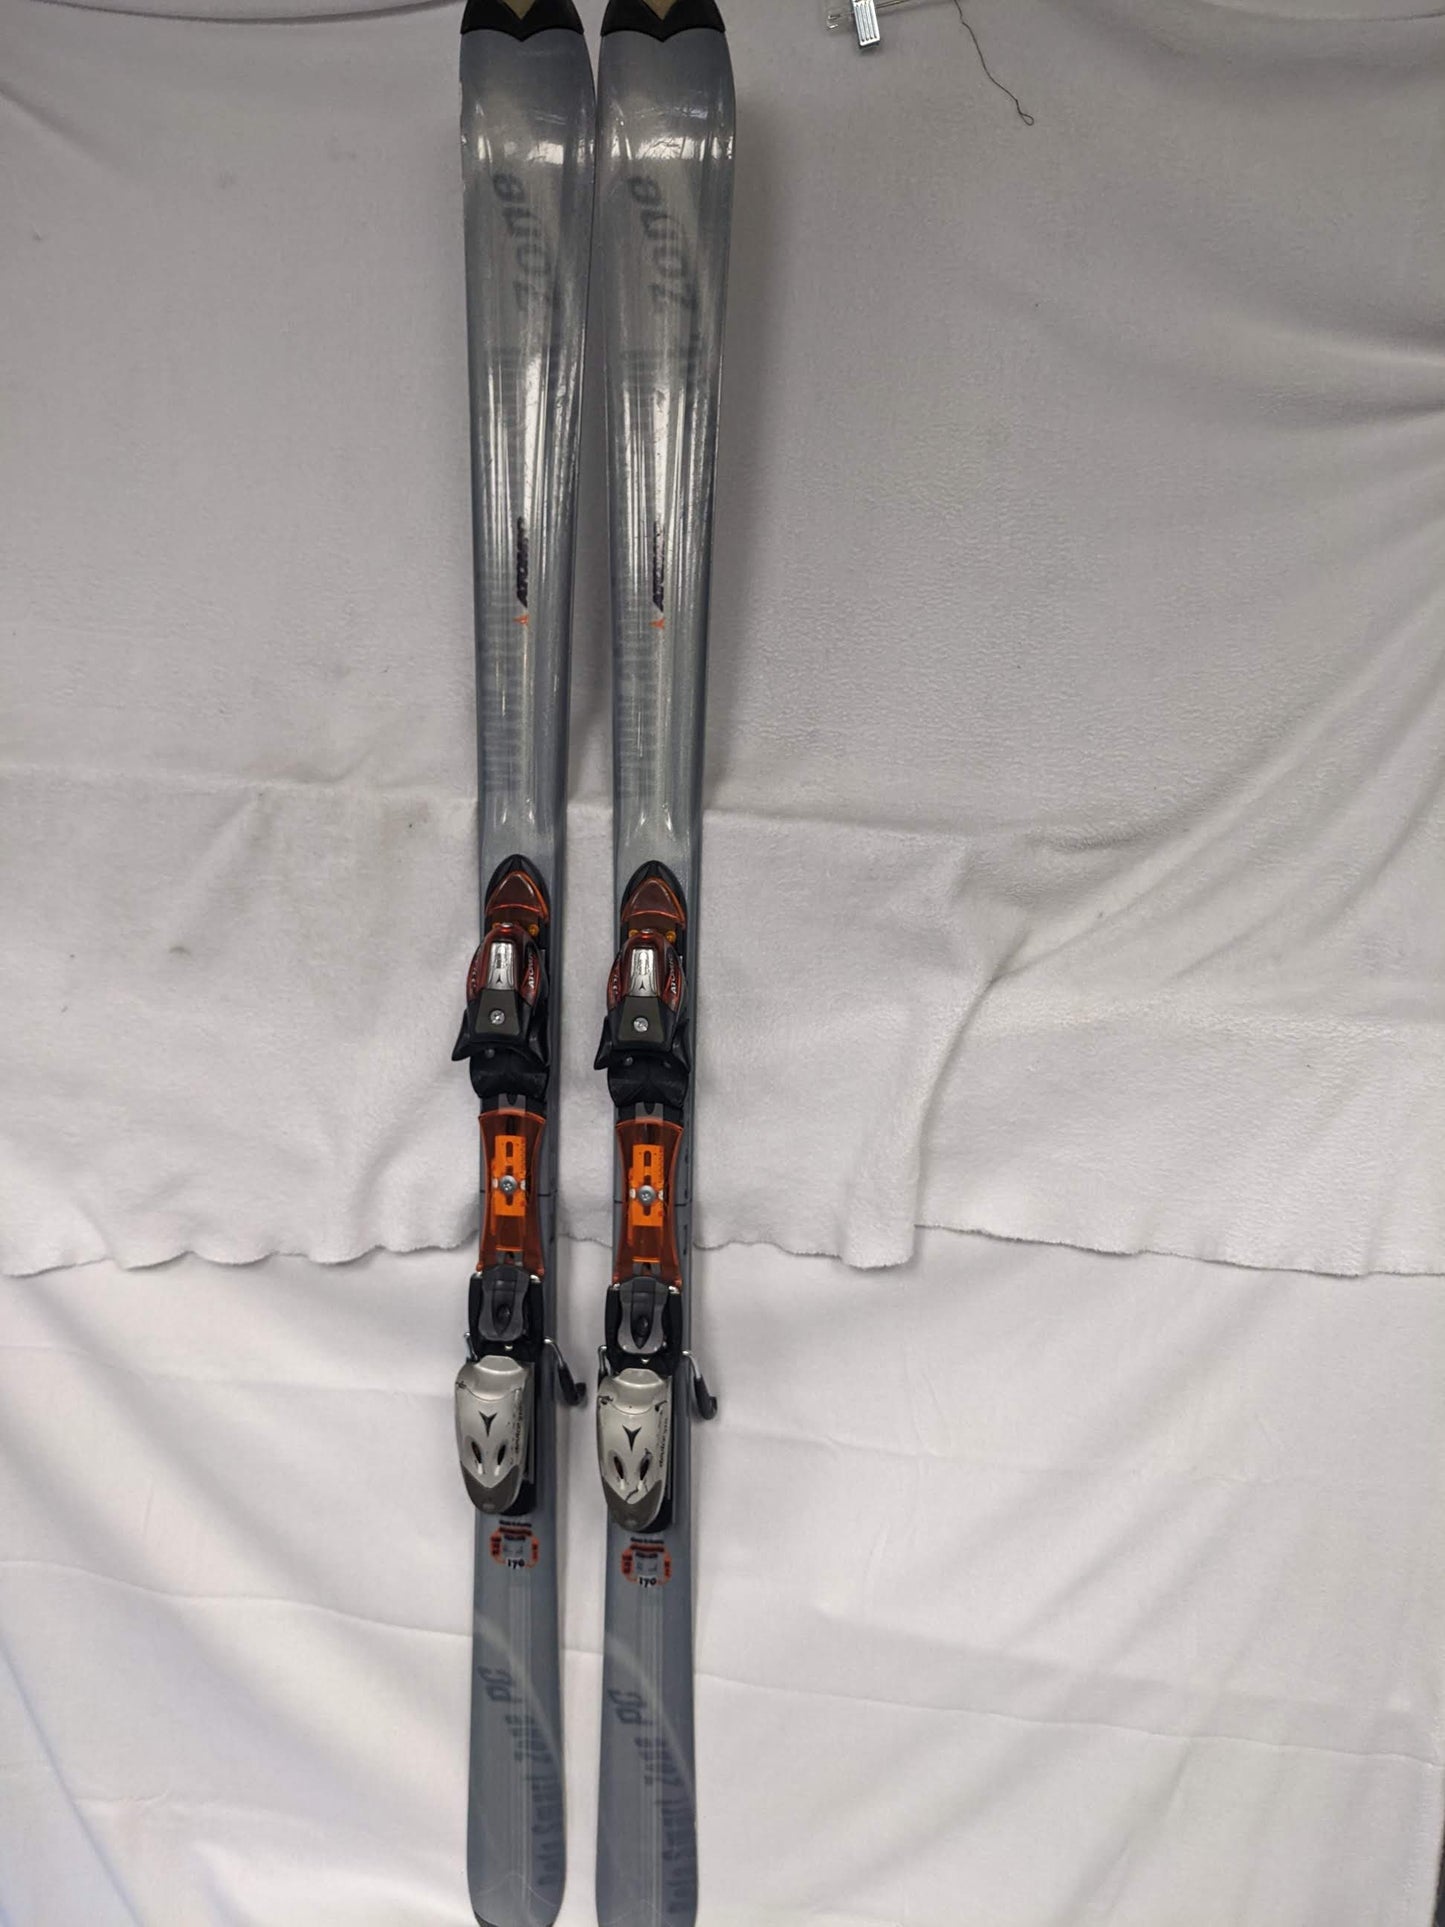 Atomic Beta Smart Zone PC Skis with Atomic Bindings Size 170 Cm Color Gray Condition Used